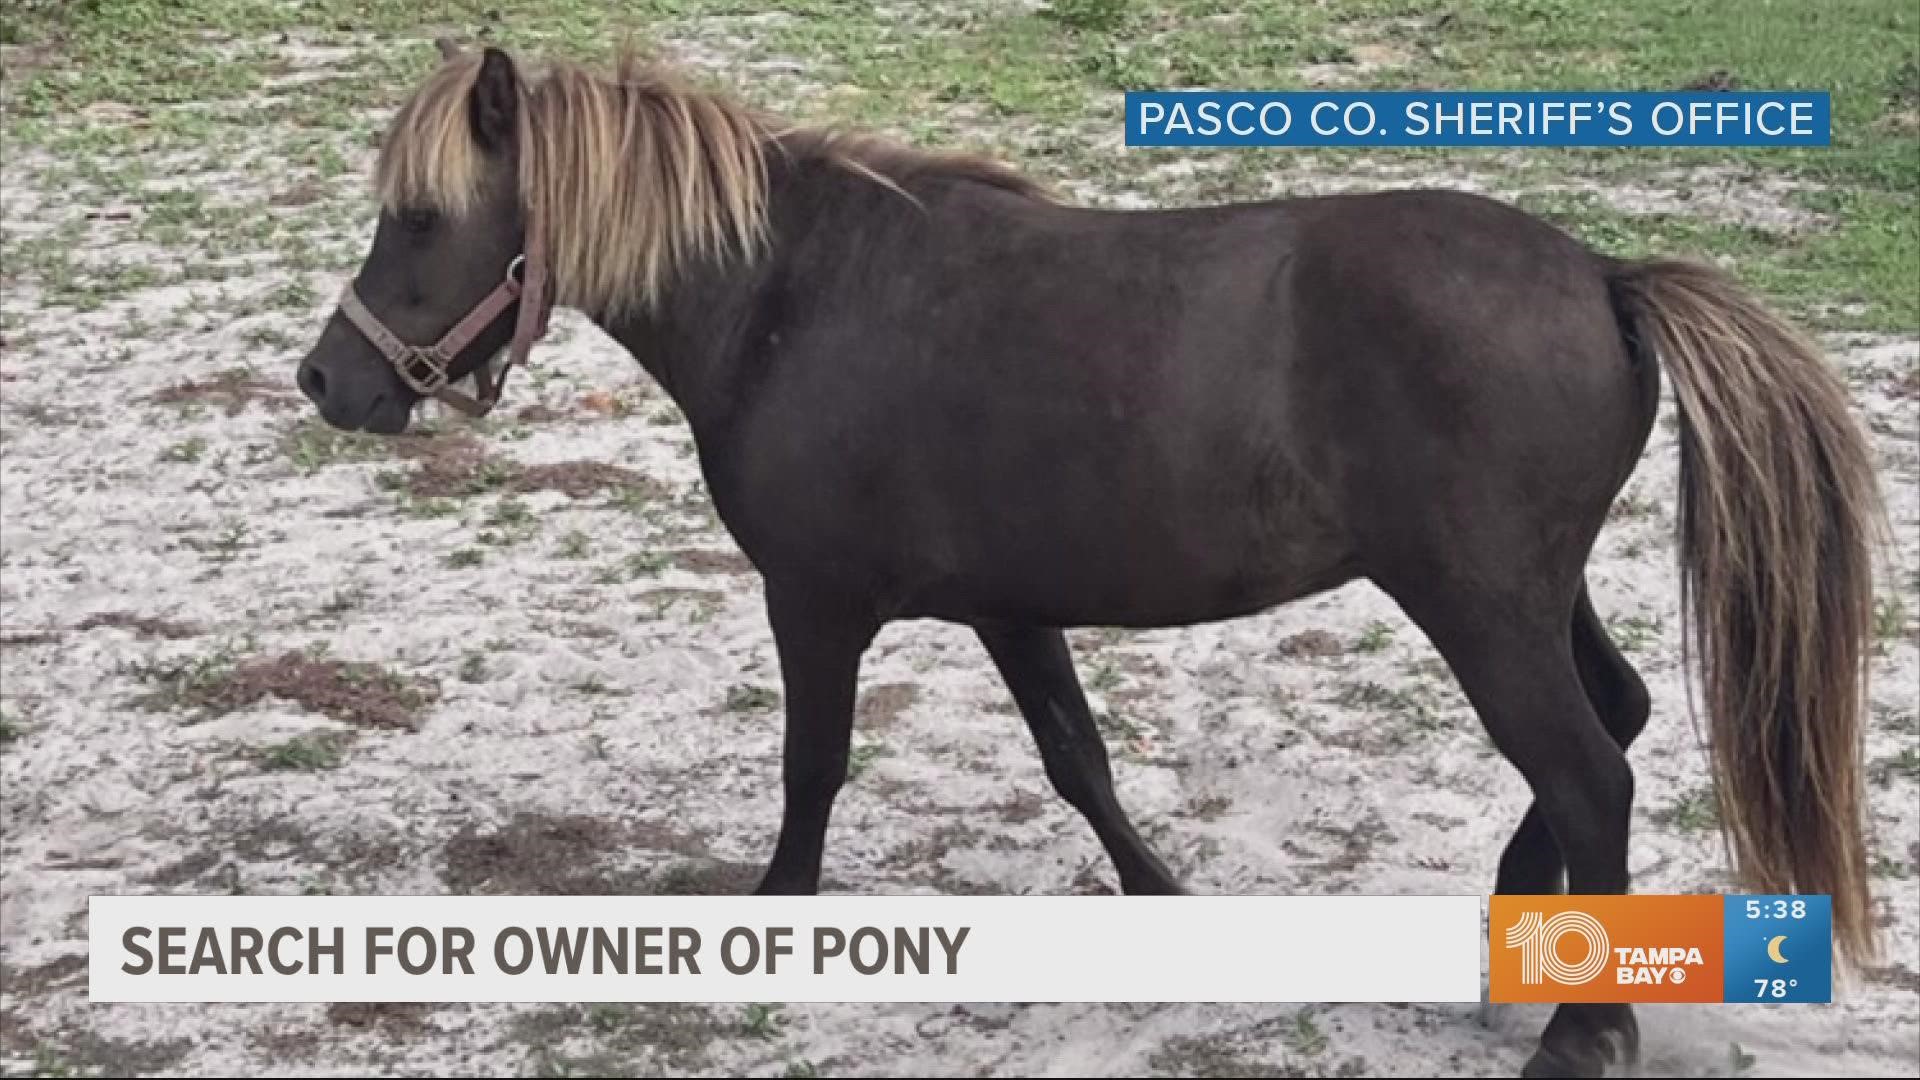 He was spotted trotting alone near Platinum Drive and Monteverde Drive in Spring Hill.